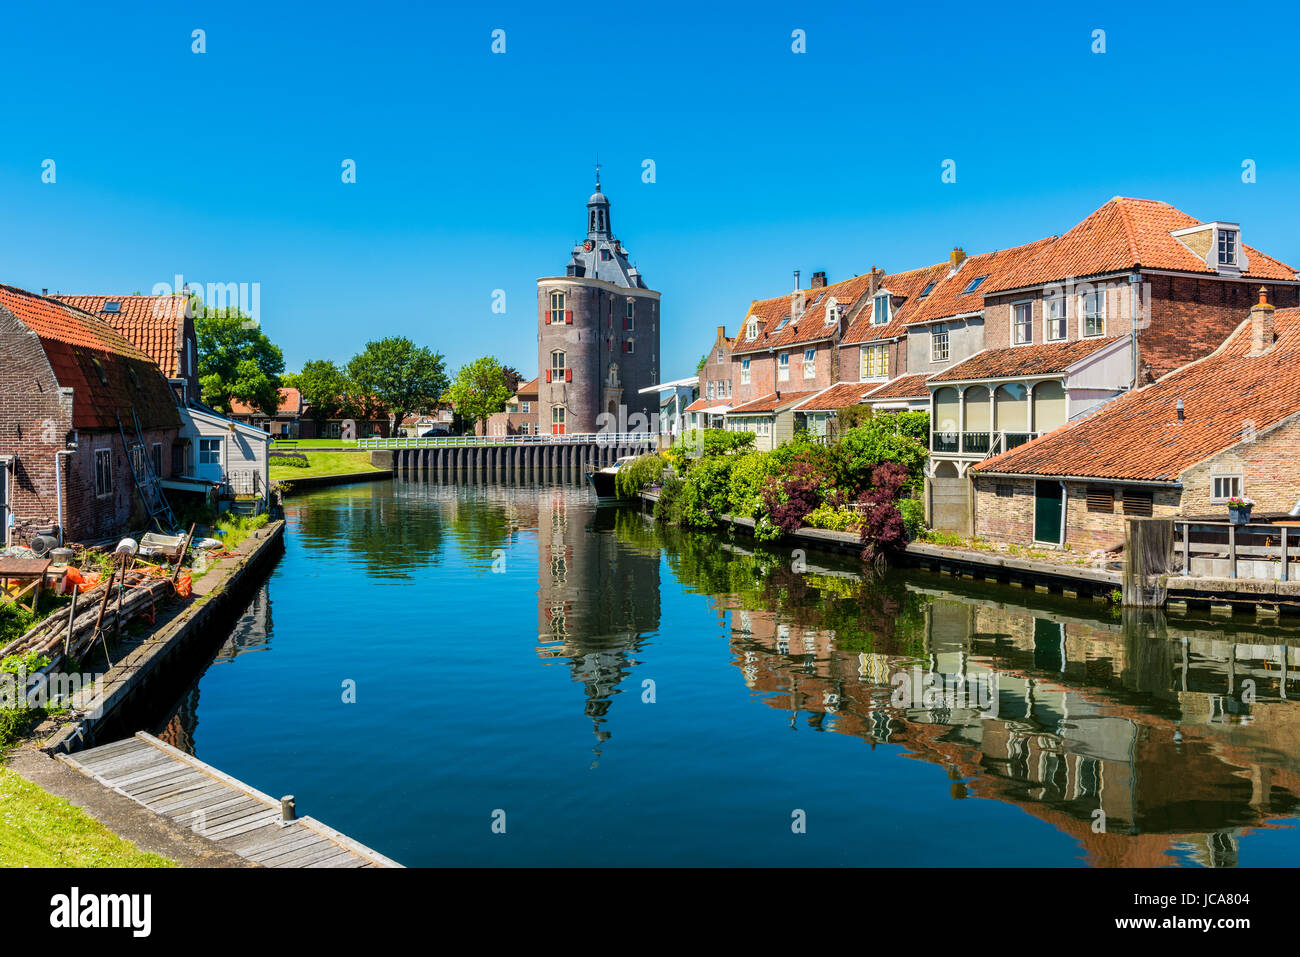 Houses along canal in Enkhuizen Netherlands Stock Photo